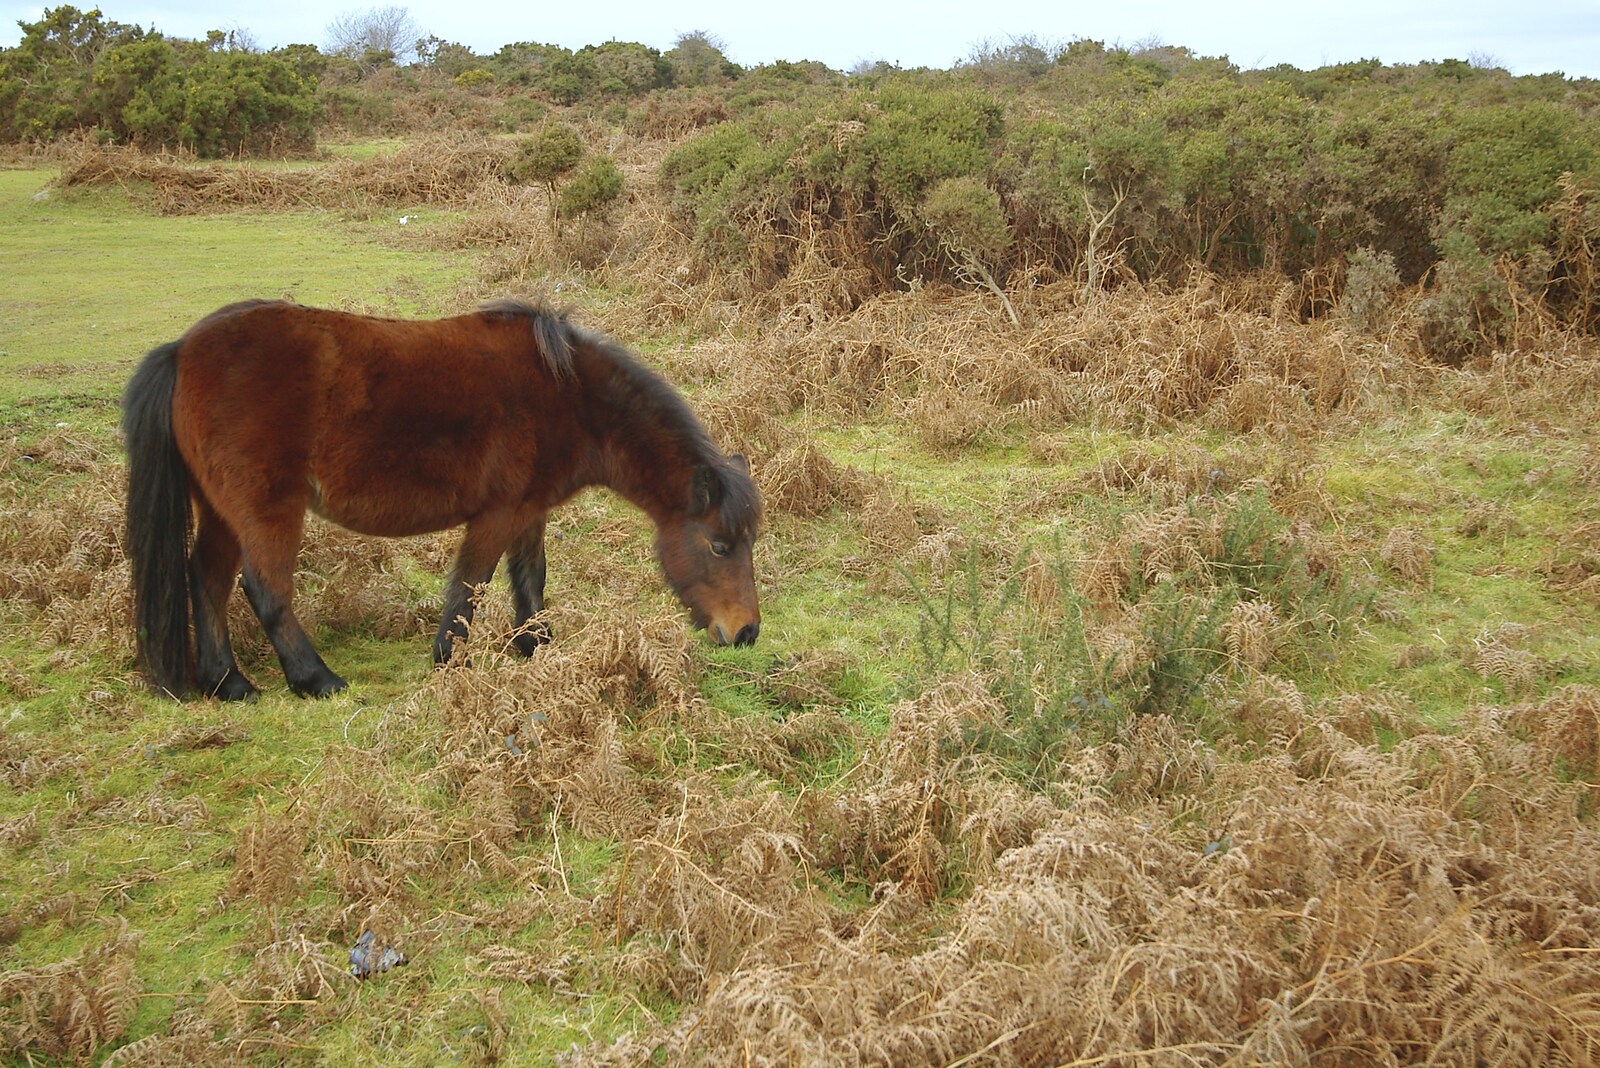 Another pony - photography like a tourist from A Wander Around Hoo Meavy and Burrator, Dartmoor, Devon - 18th December 2005